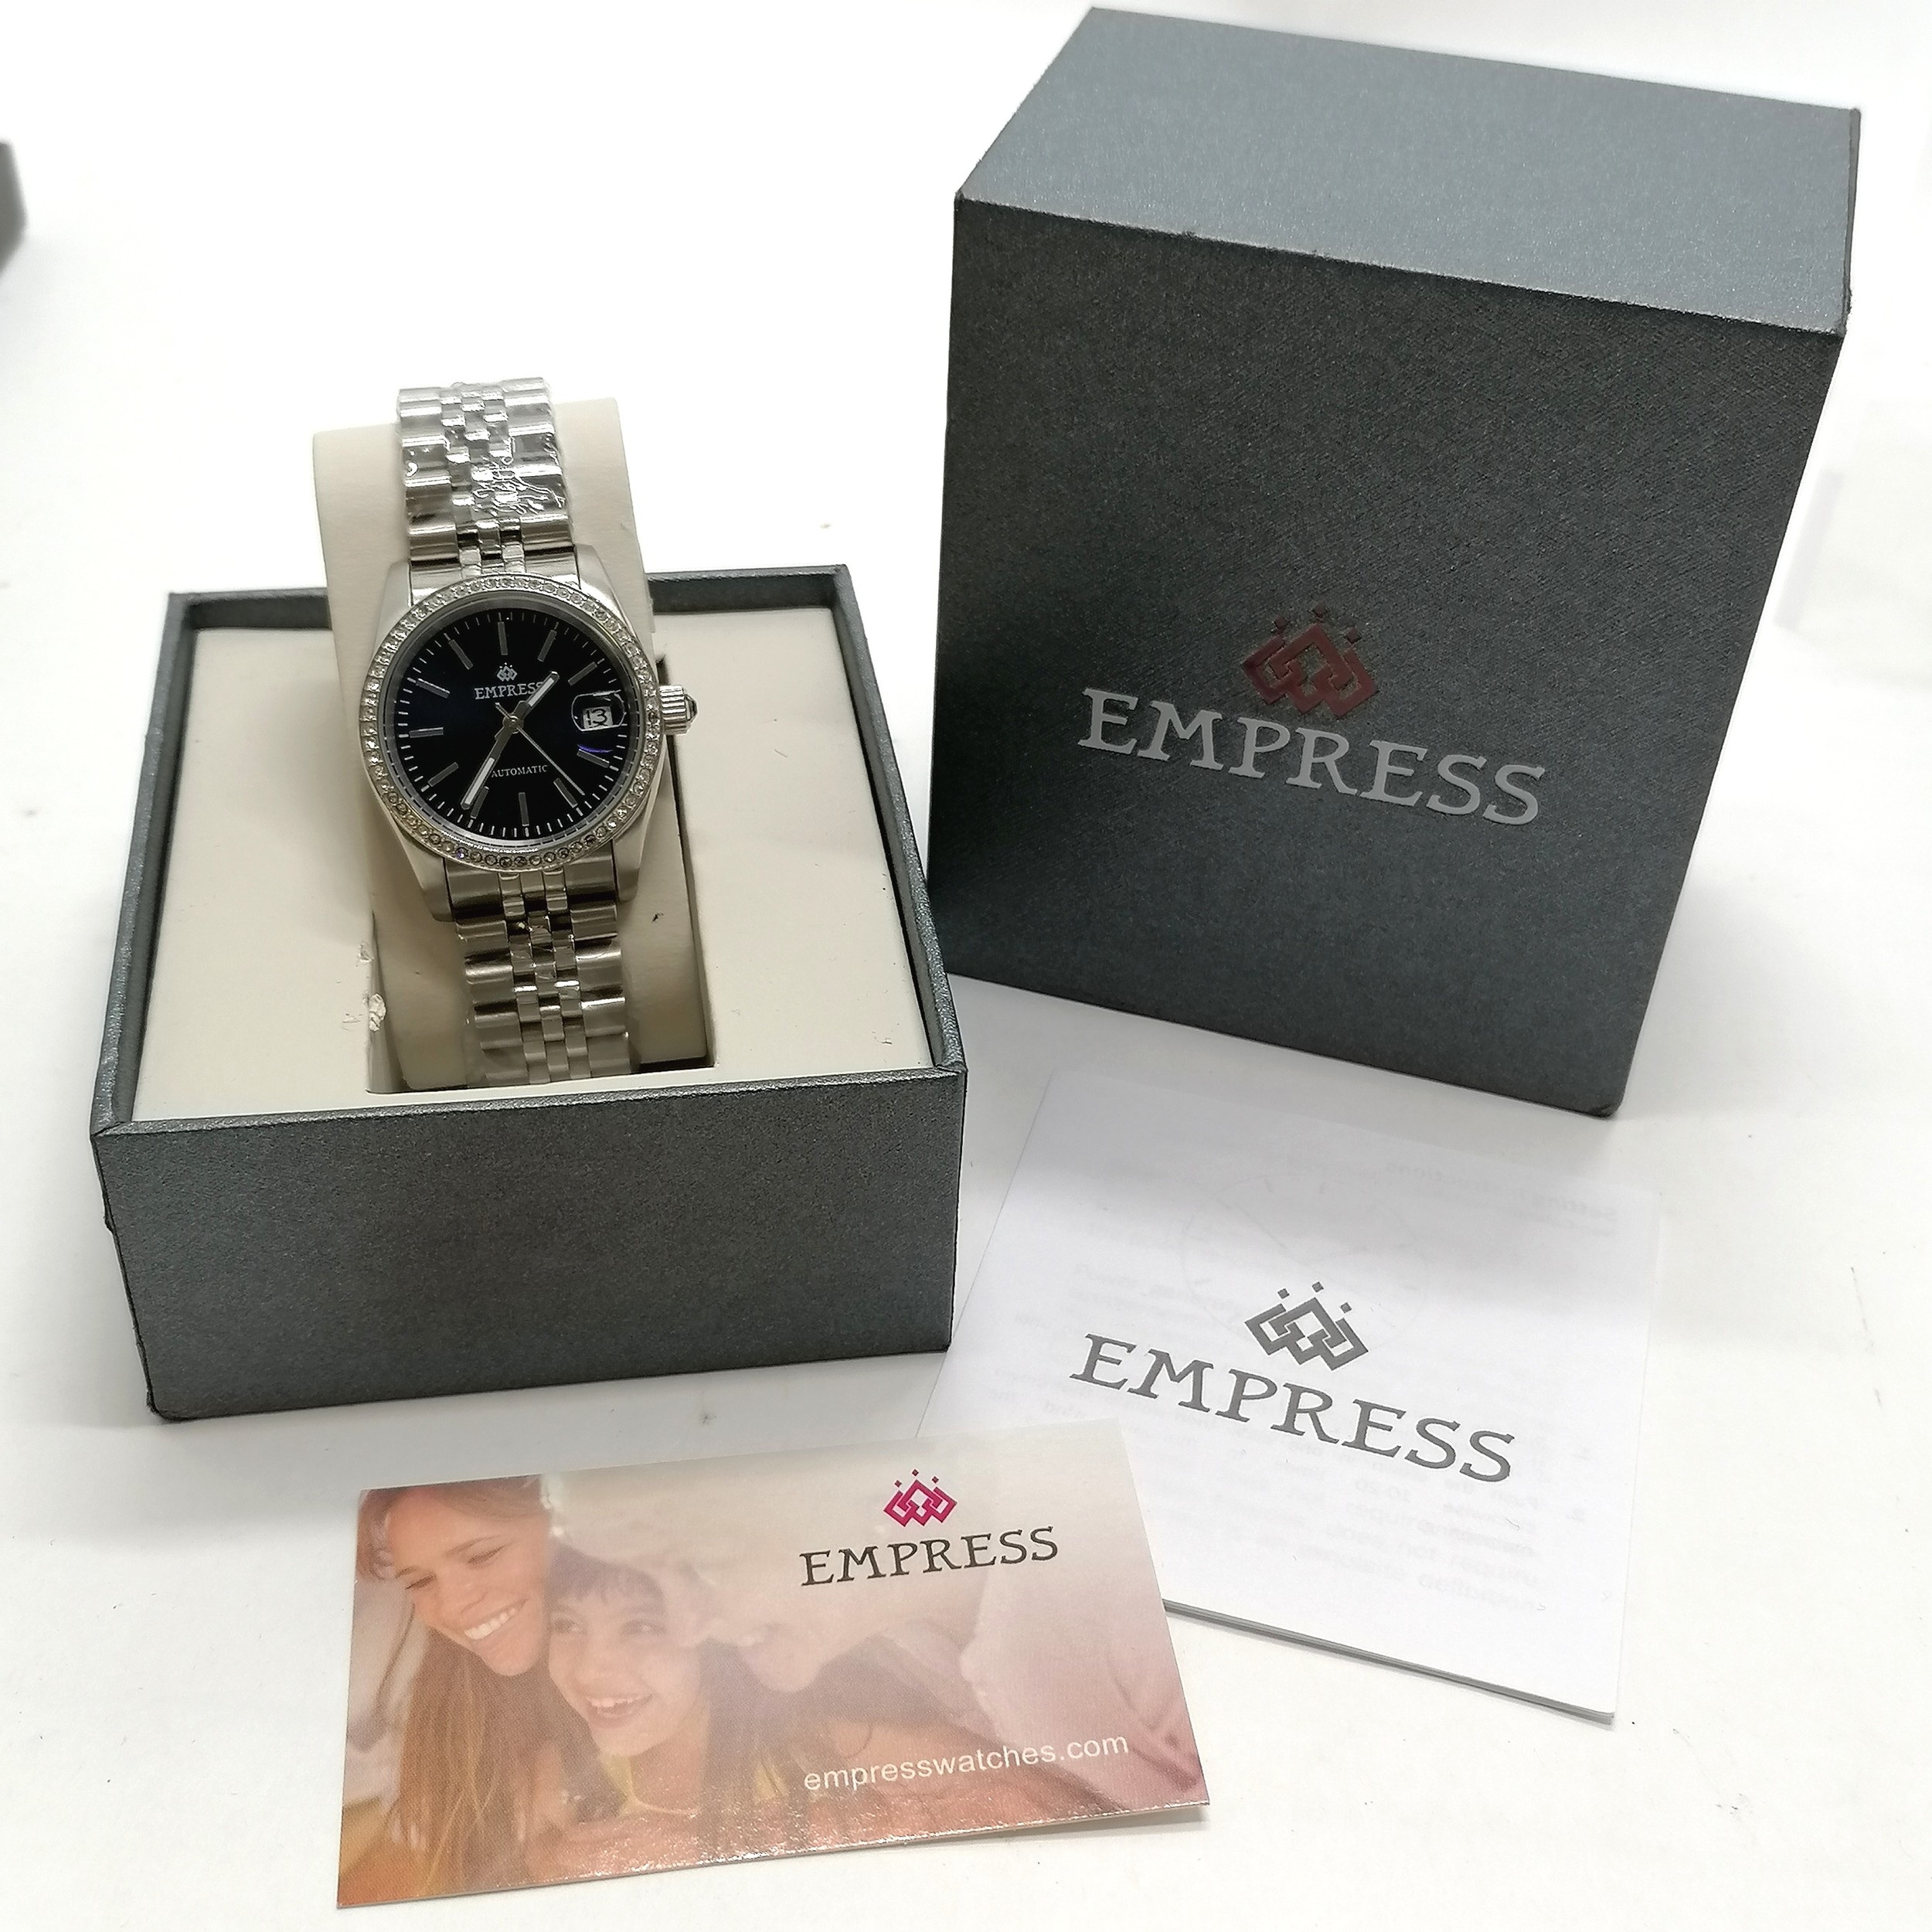 Empress automatic wristwatch (34mm case) in box / outer box with card ~ in unworn condition and - Image 2 of 3